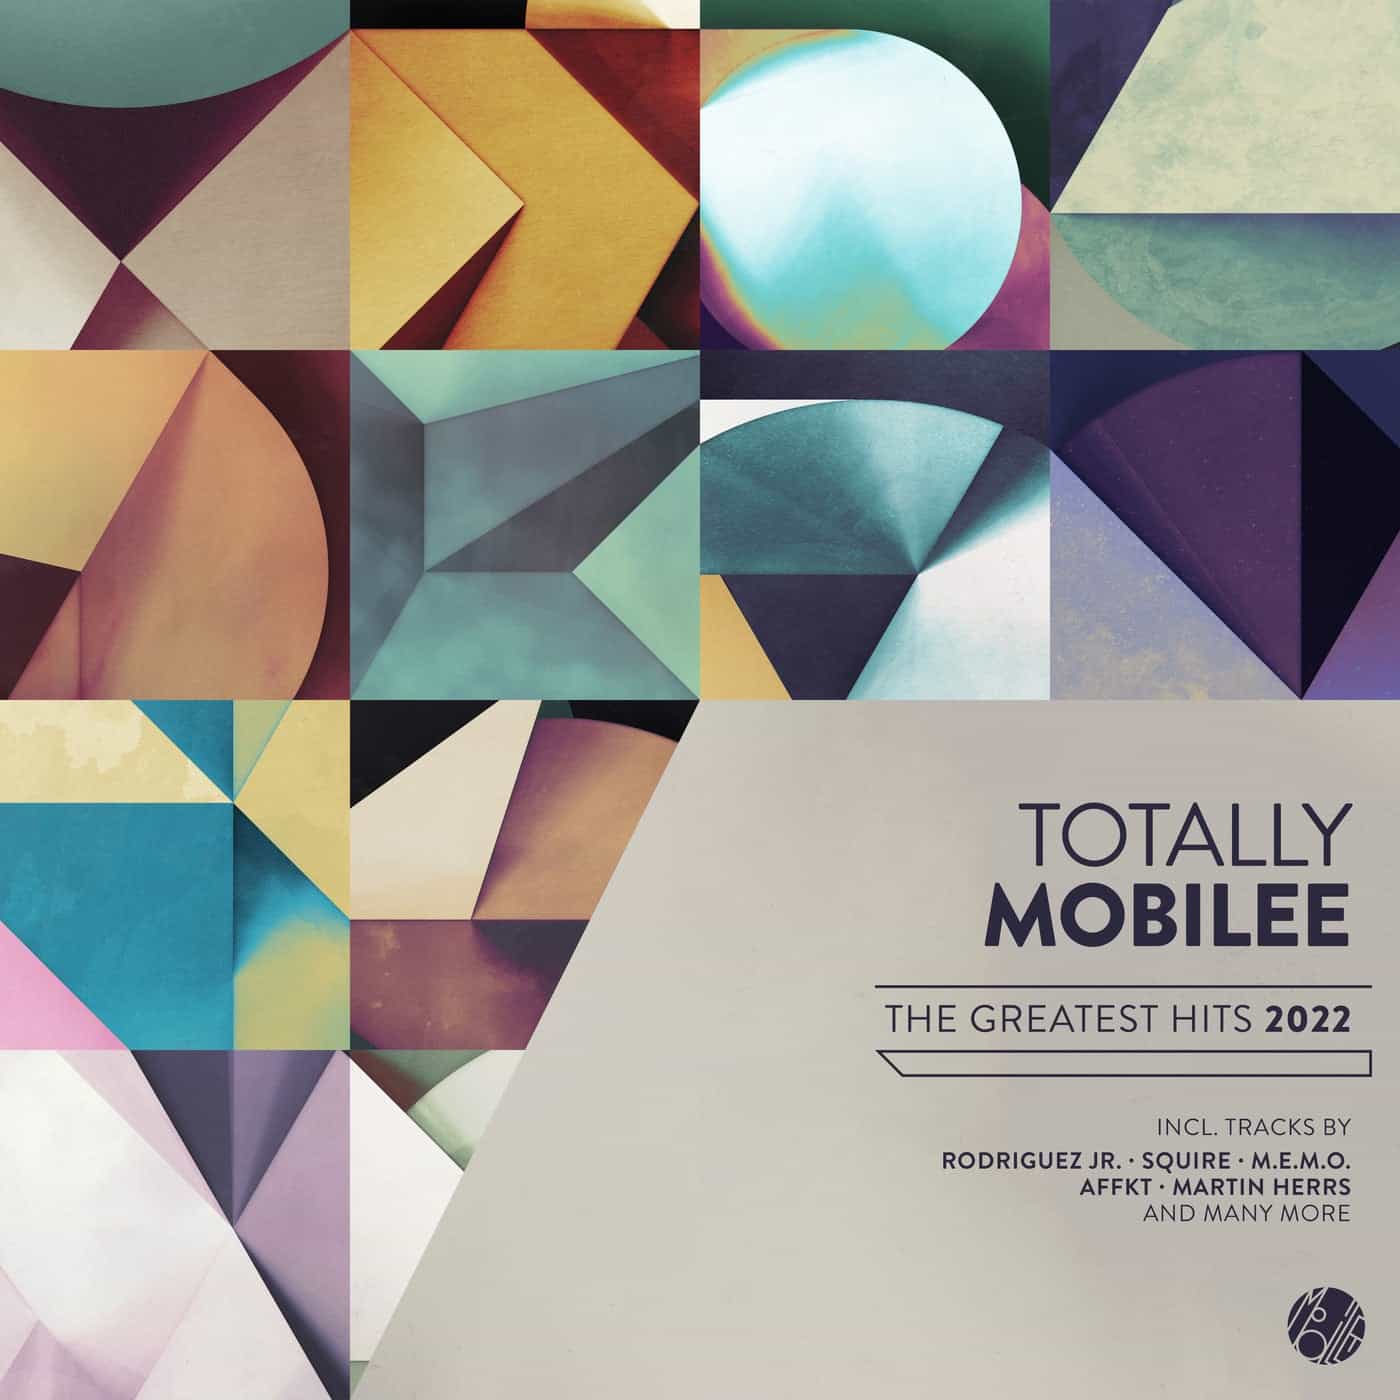 Download VA - Totally Mobilee - Greatest Hits 2022 on Electrobuzz